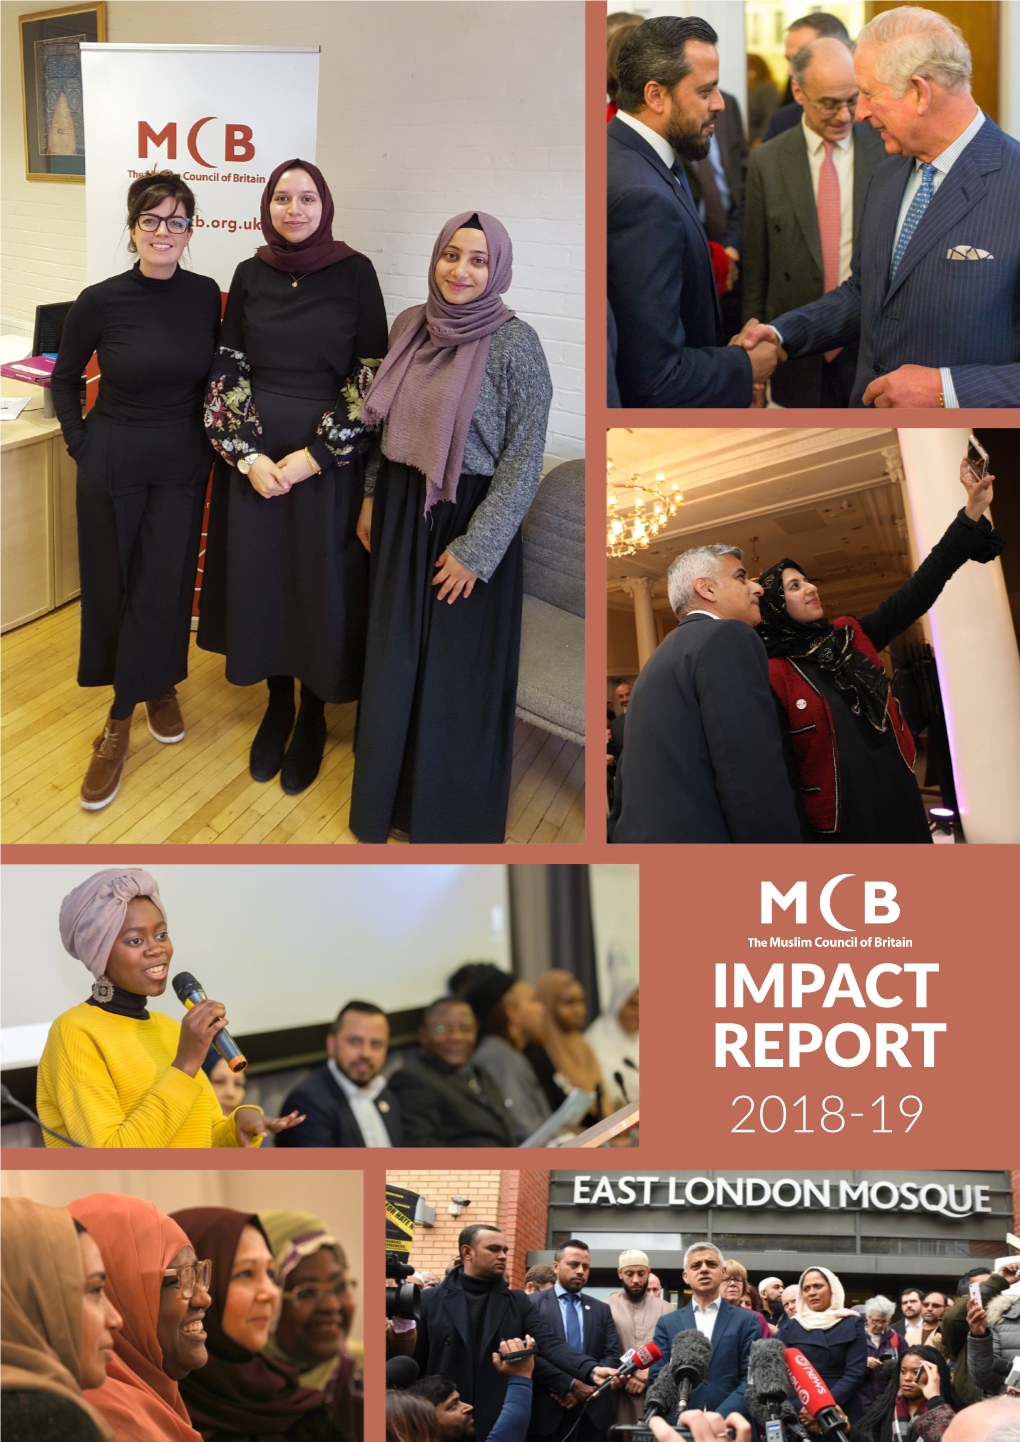 IMPACT REPORT 2018-19 Received with Worldwide Commendation and Played a Significant Part in Restoring Peace and Security in the Aftermath